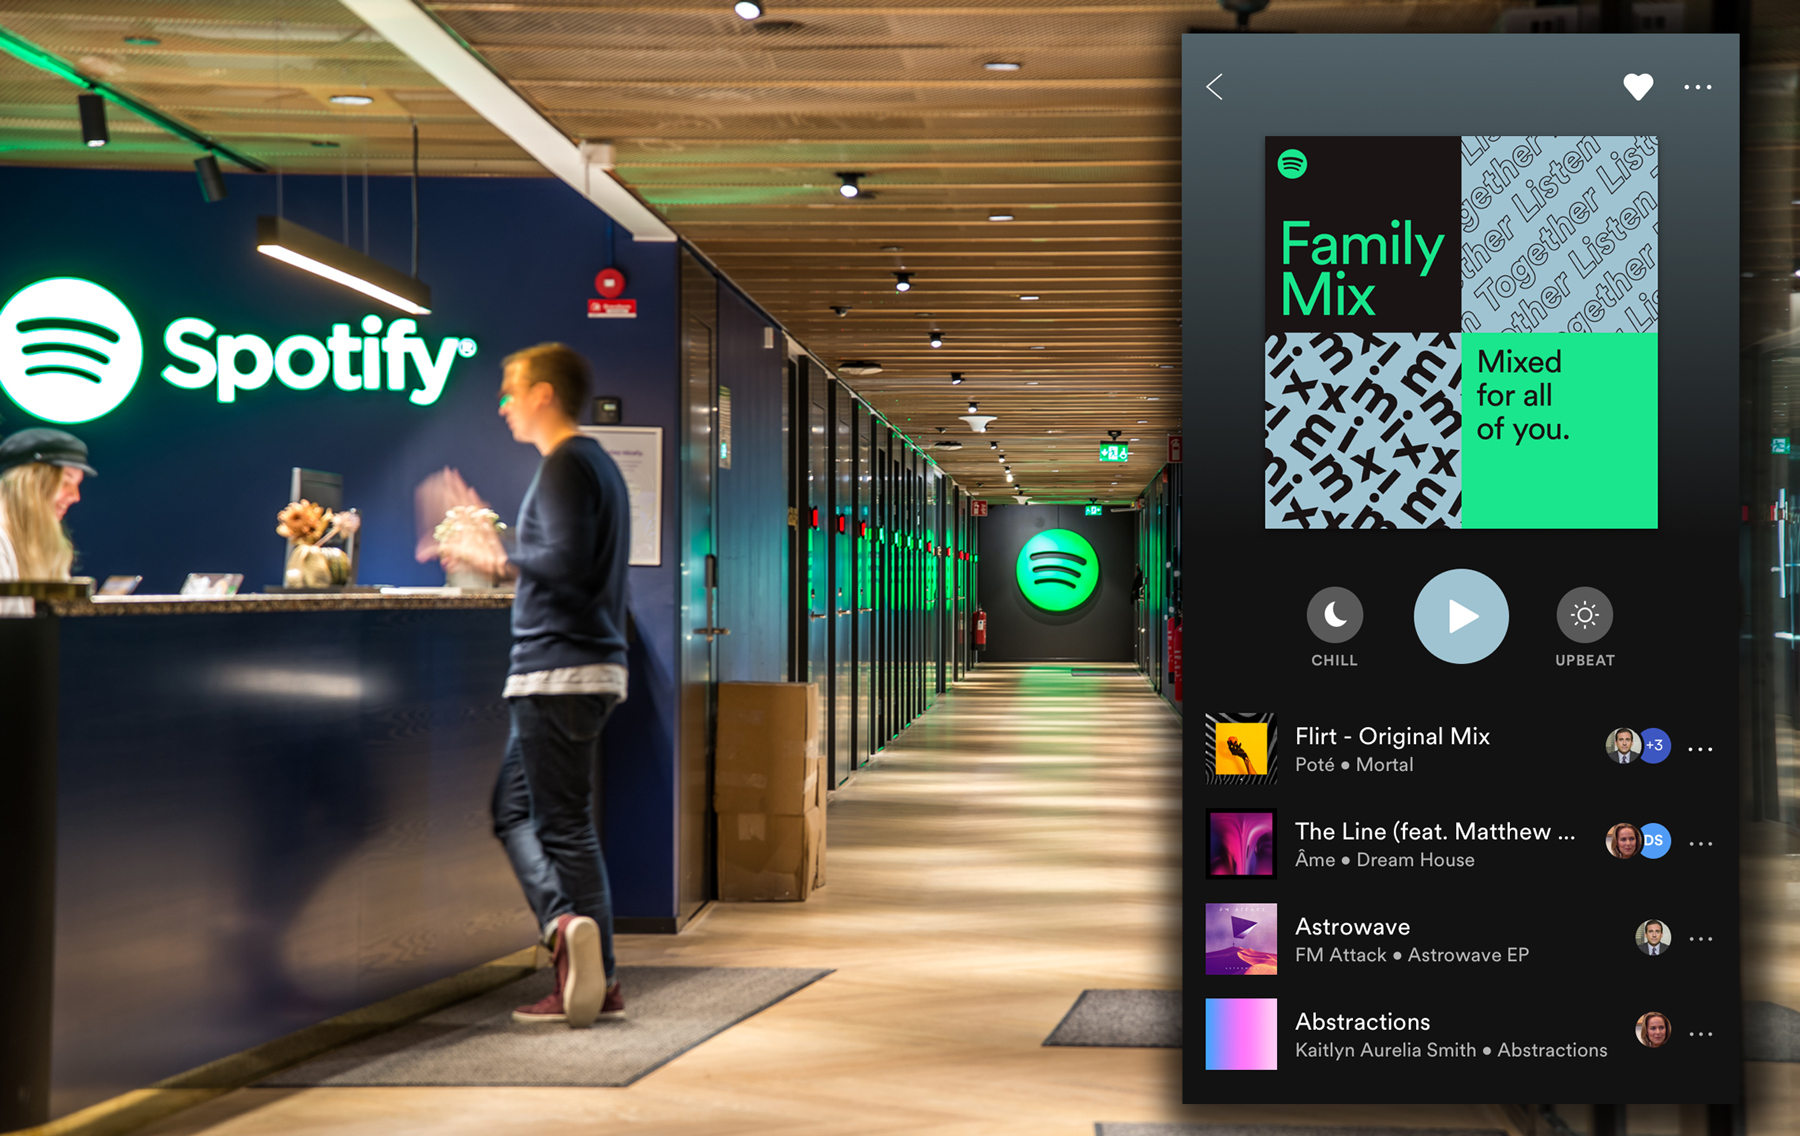 how much is spotify premium family